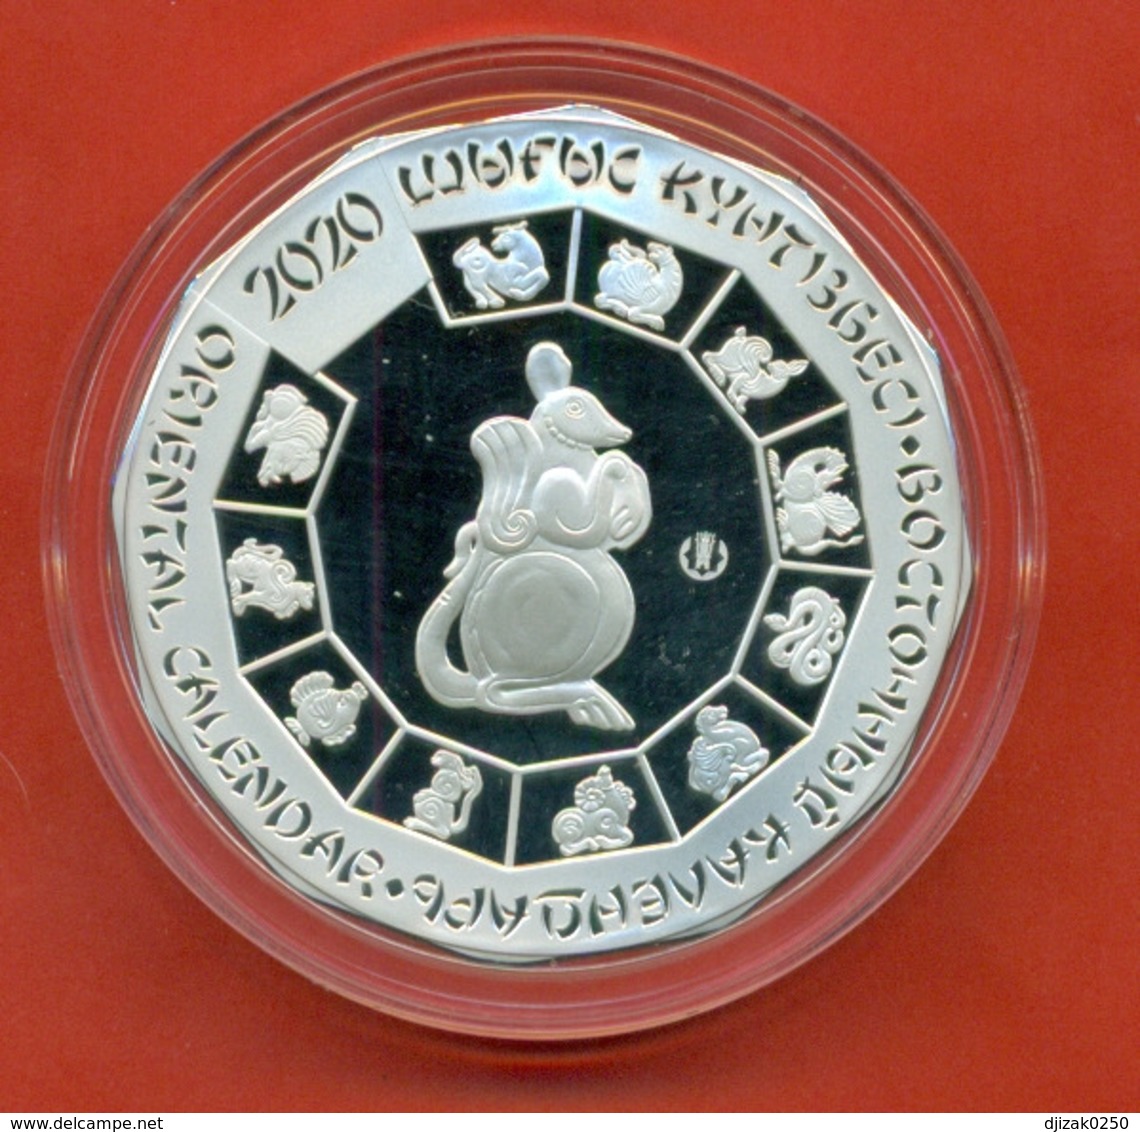 Kazakhstan 2019. Silver Coin "Chinese New Year". 2020 Is The Year Of The Mouse. Weight 31,1 Grams. In The Box. - Kazachstan